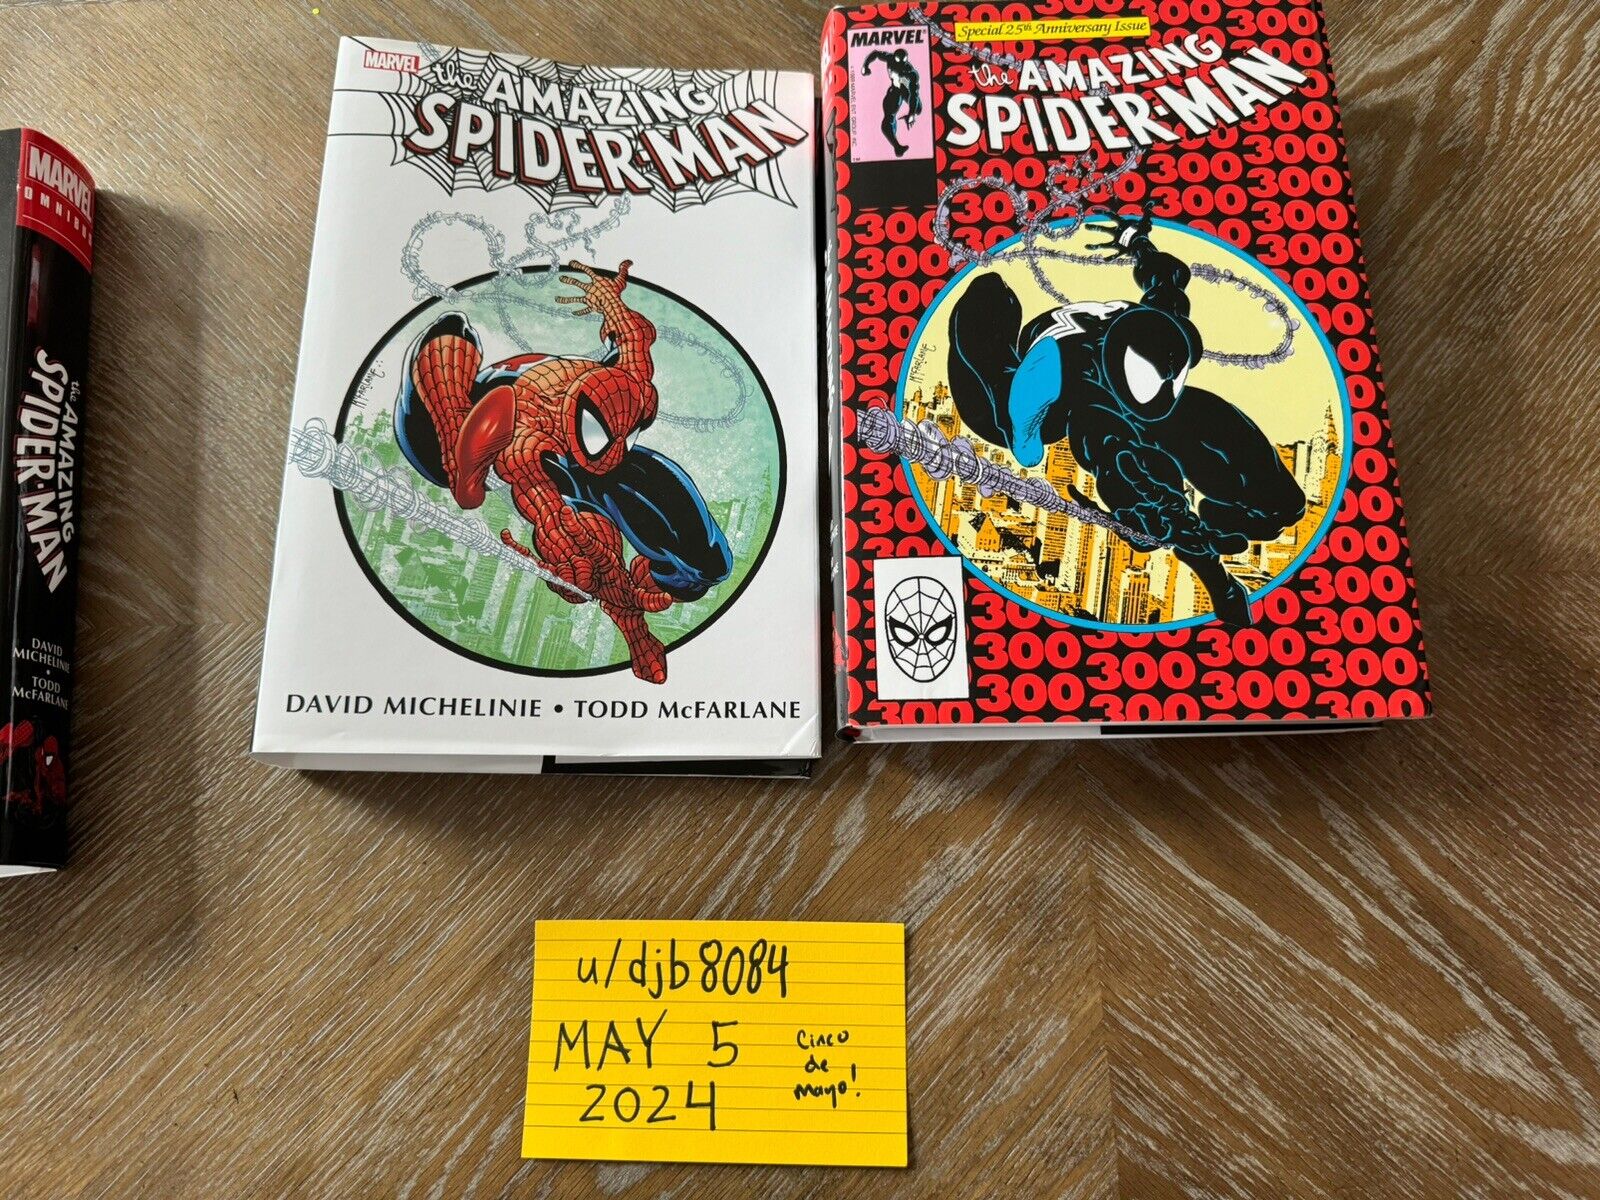 Amazing Spider-man by Michelinie and McFarlane  vol 1 -- 2 dust jackets included